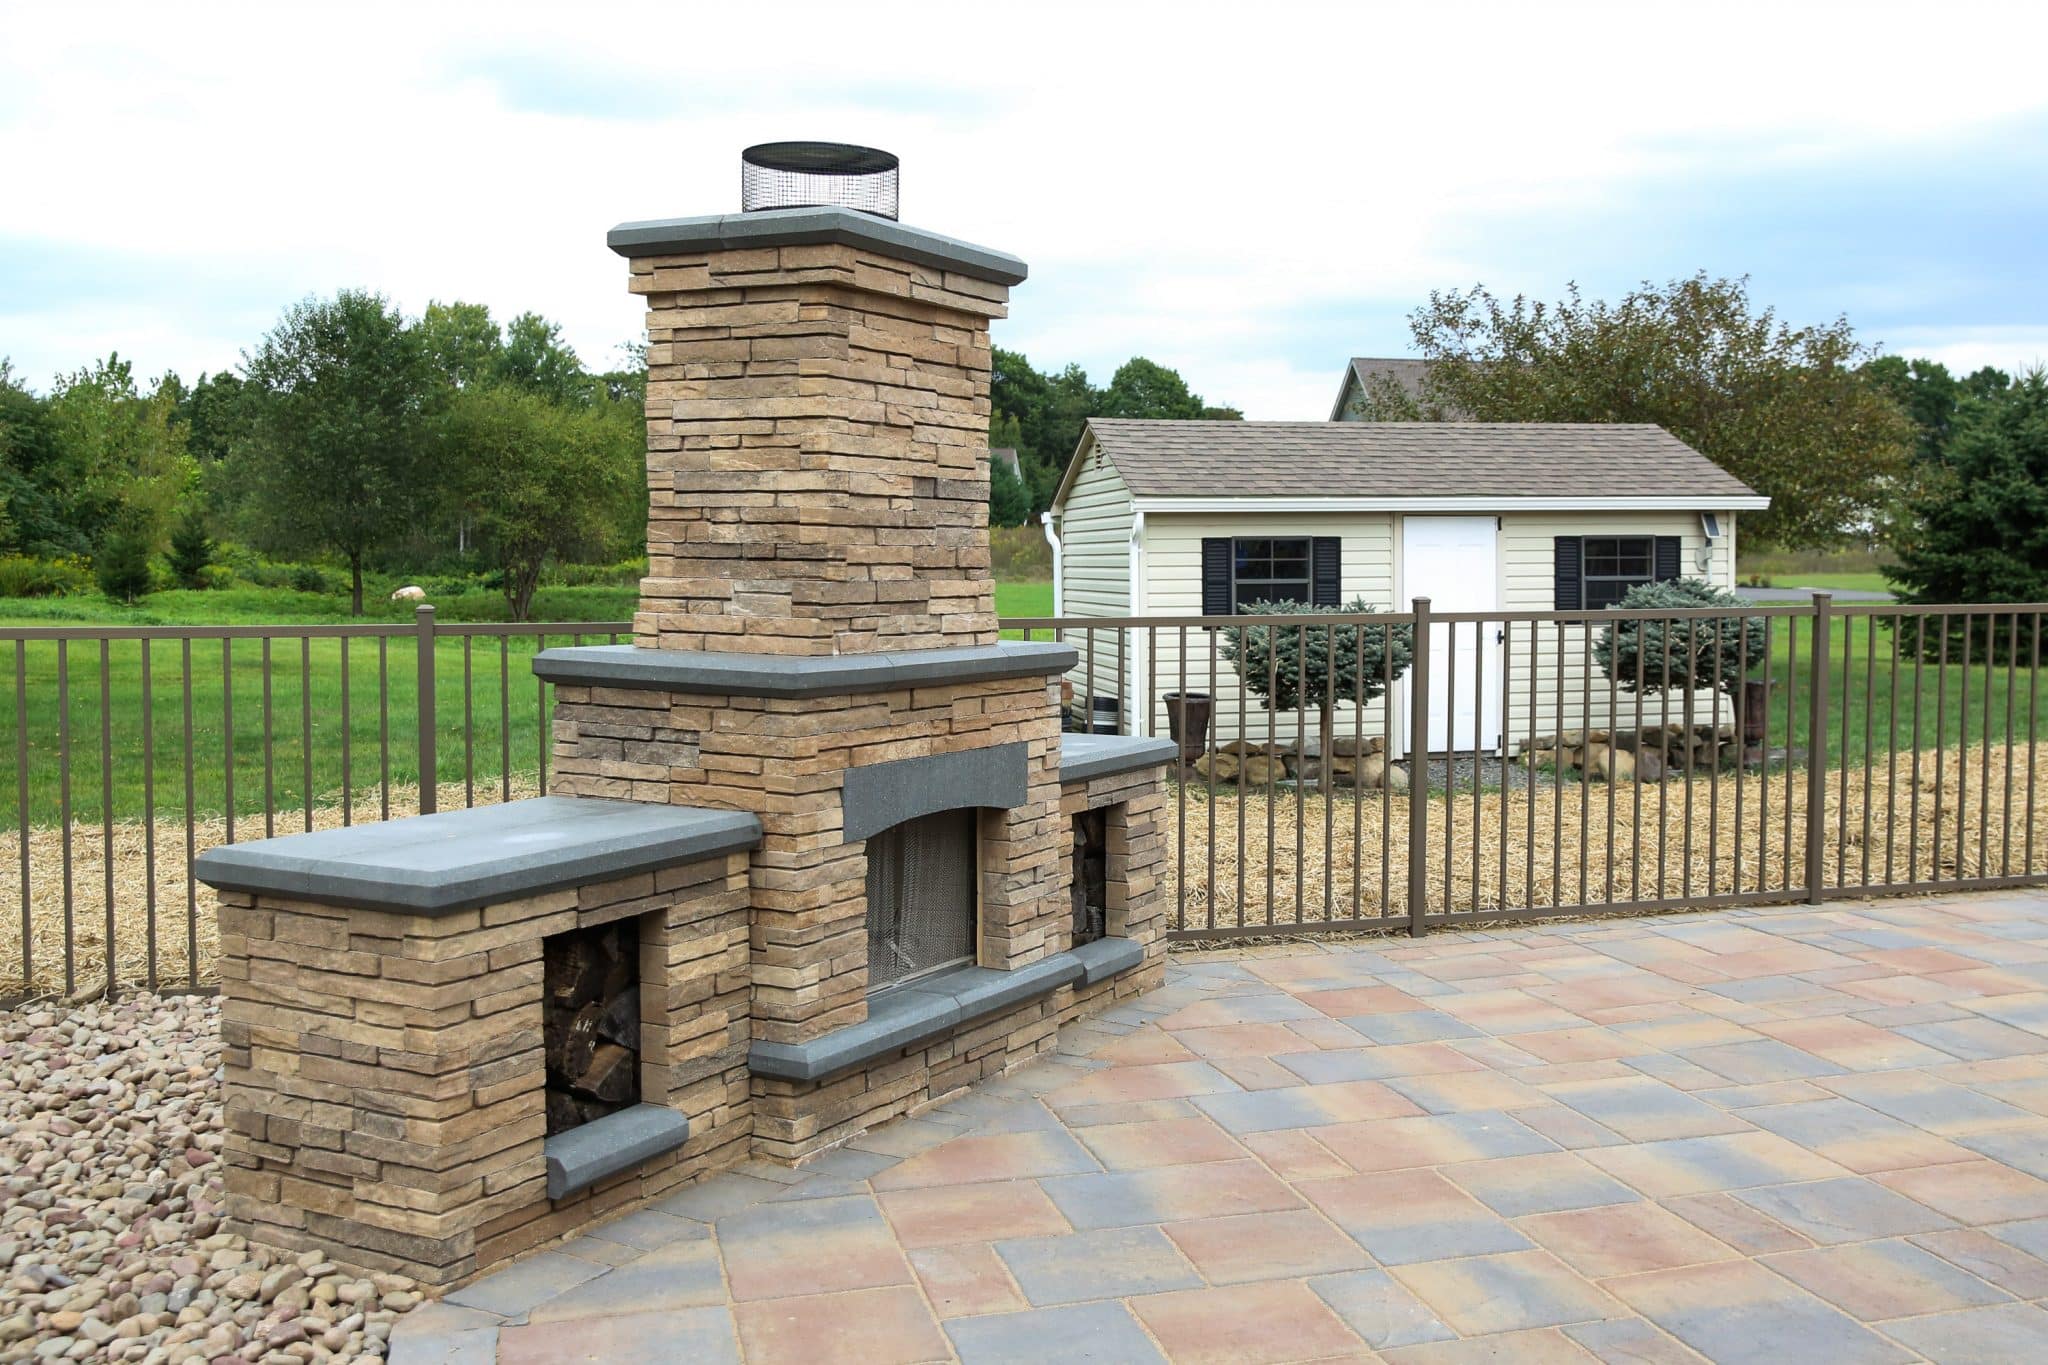 A Belgard Bordeaux series outdoor free standing fireplace with side wood boxes on a Belgard patio with pool fencing.